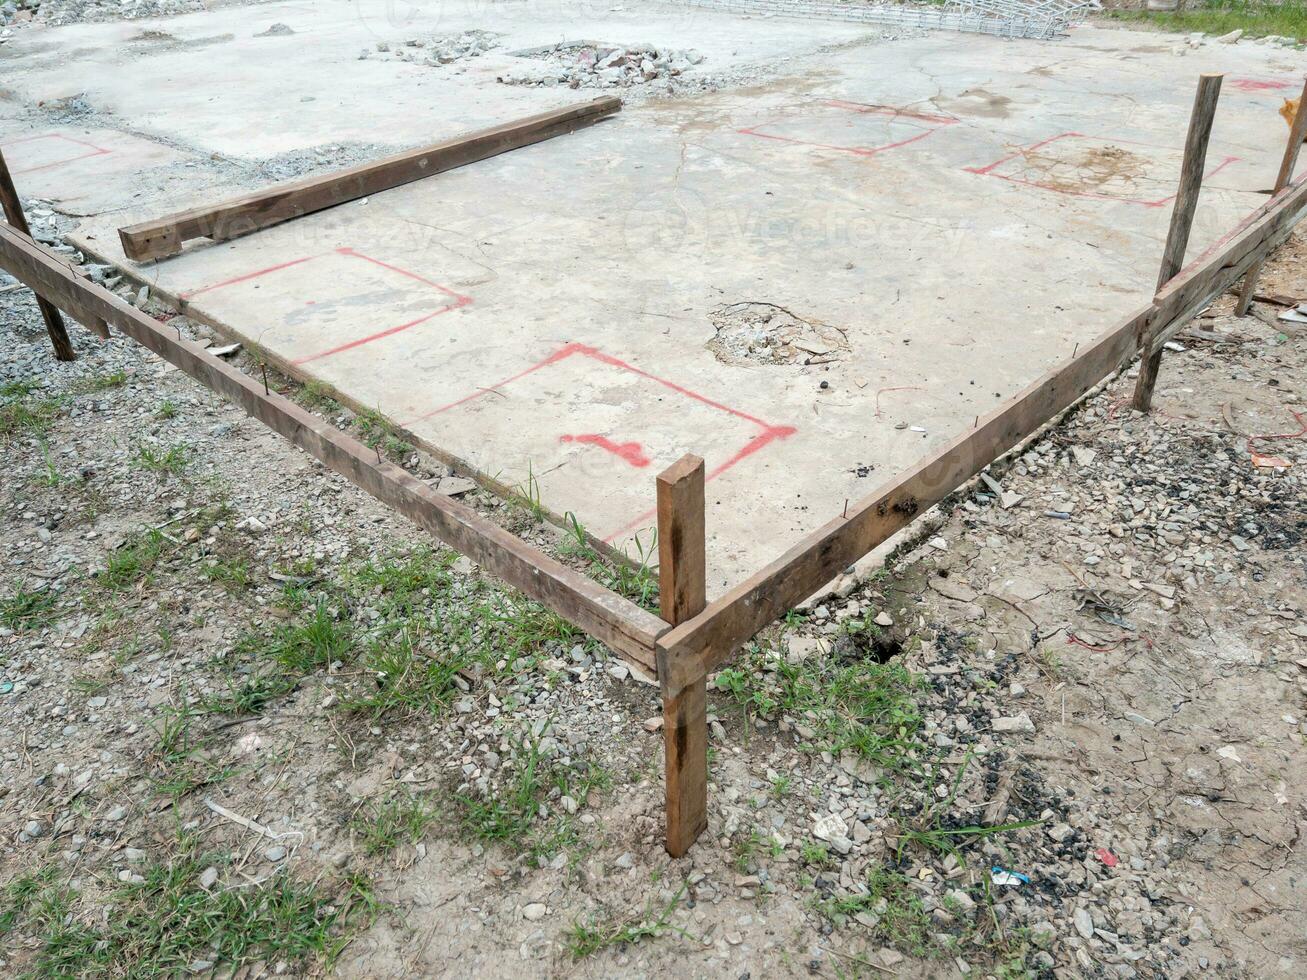 The concrete base with the wooden frame. photo